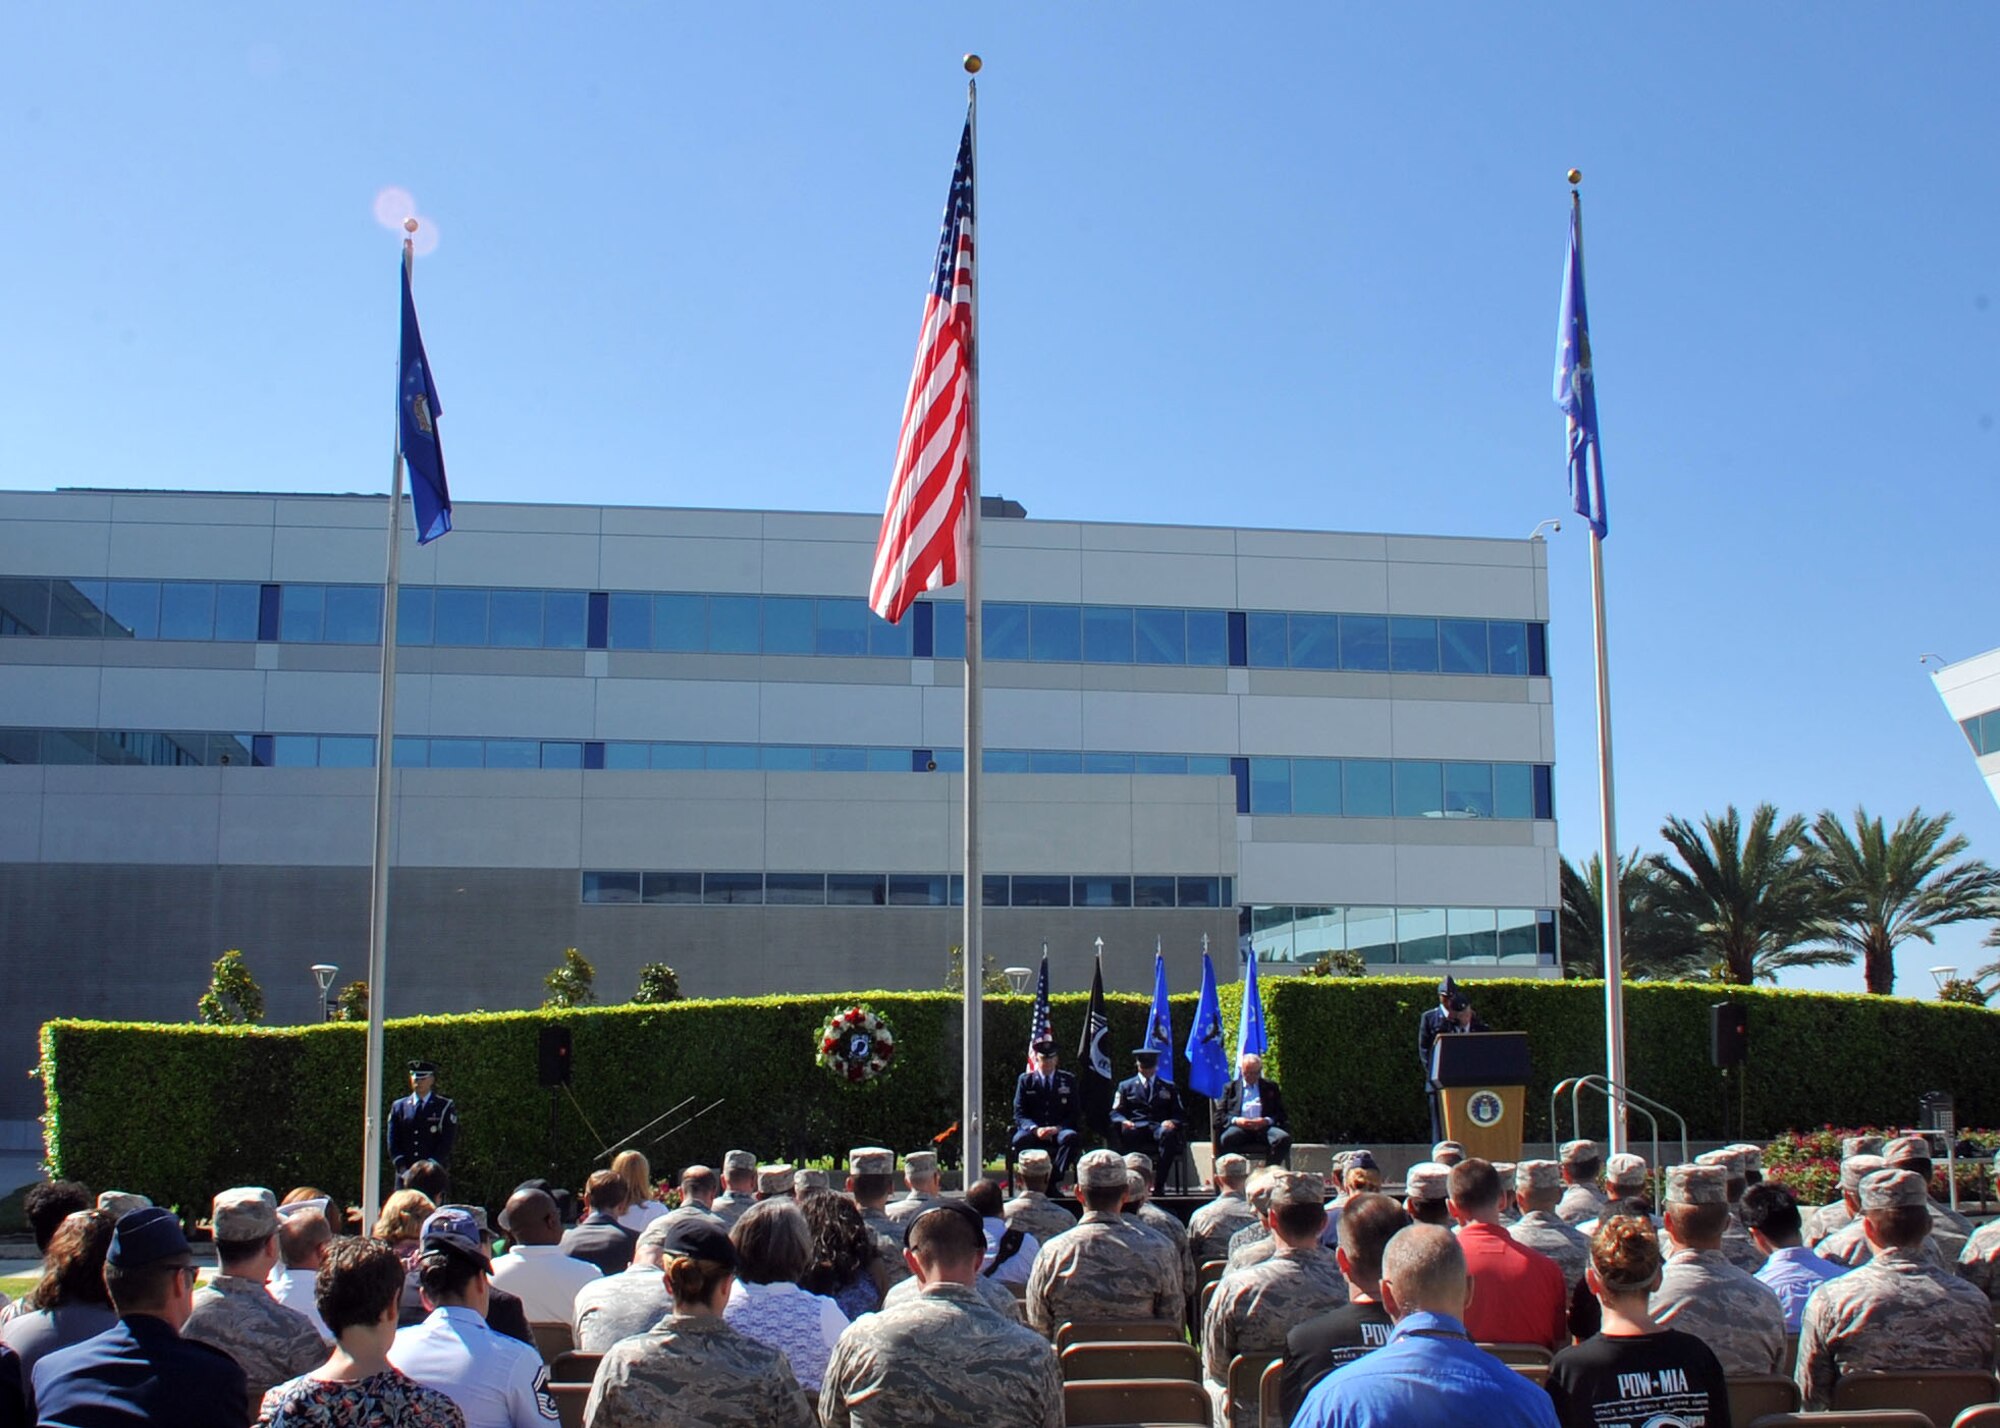 The National POW/MIA Recognition Day ceremony draws to a close Sept. 18 at the Space and Missile Systems Center's Schriever Space Complex at Los Angeles Air Force Base in El Segundo, Calif. (U.S. Air Force photo/Sarah Corrice)